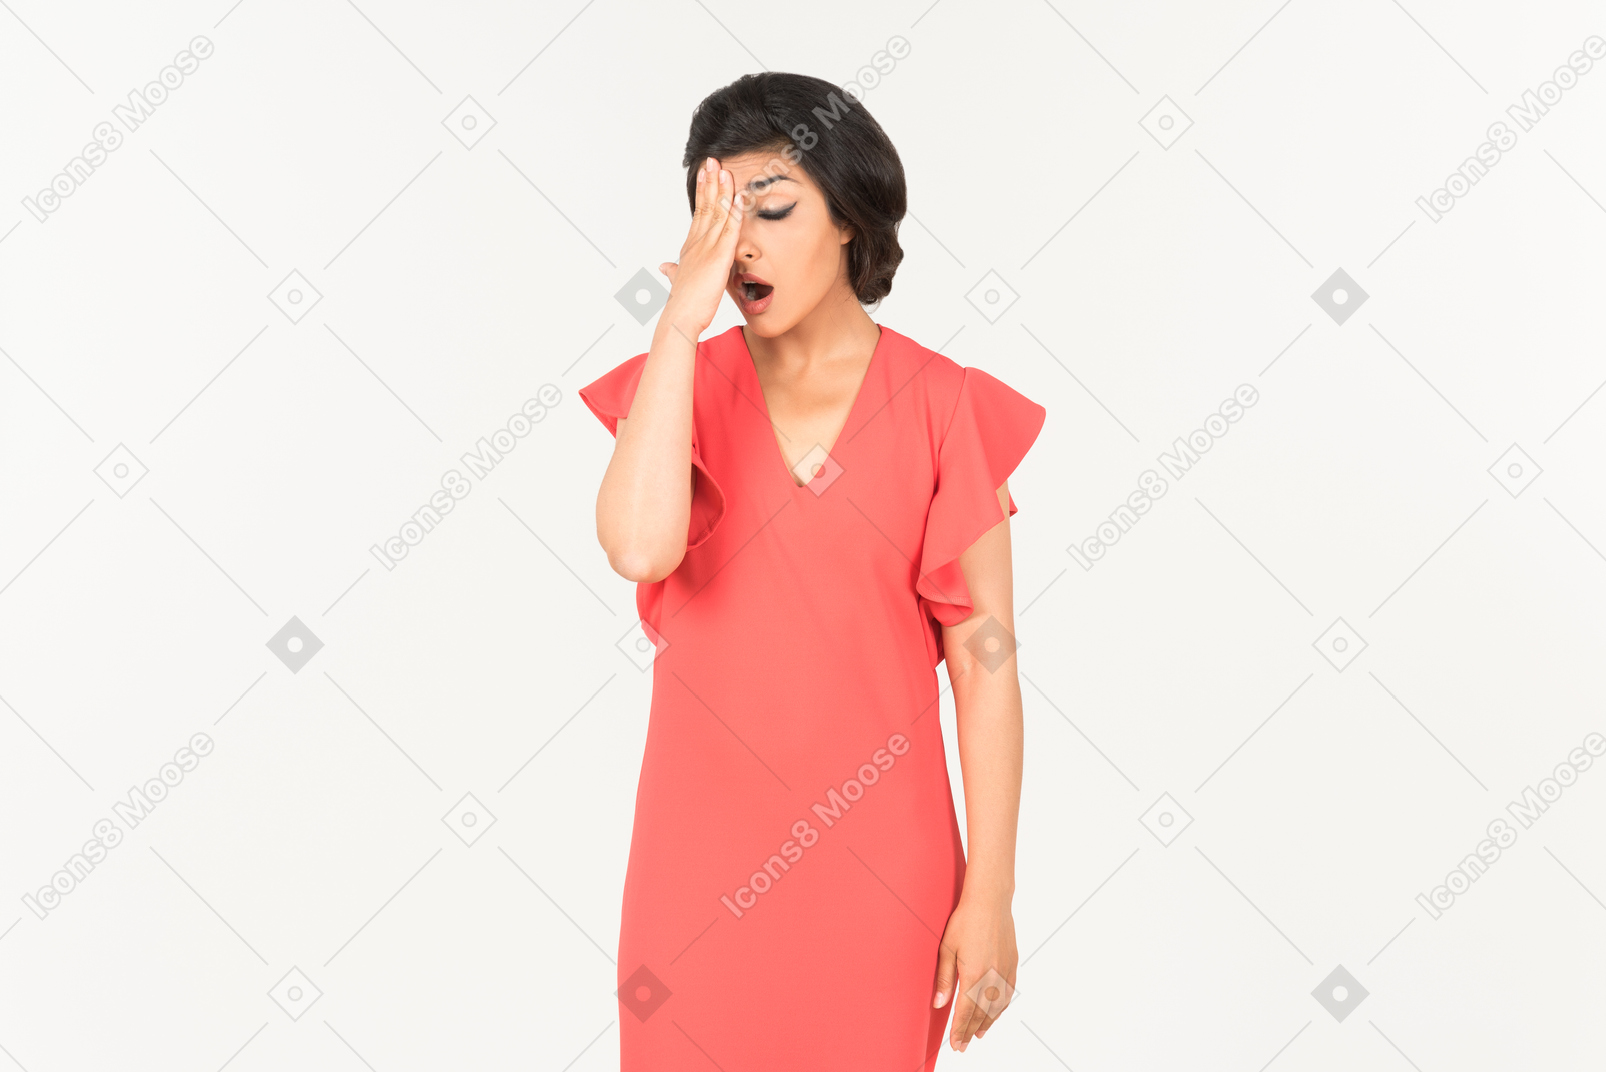 Looking worried young indian woman closing her face with a hand